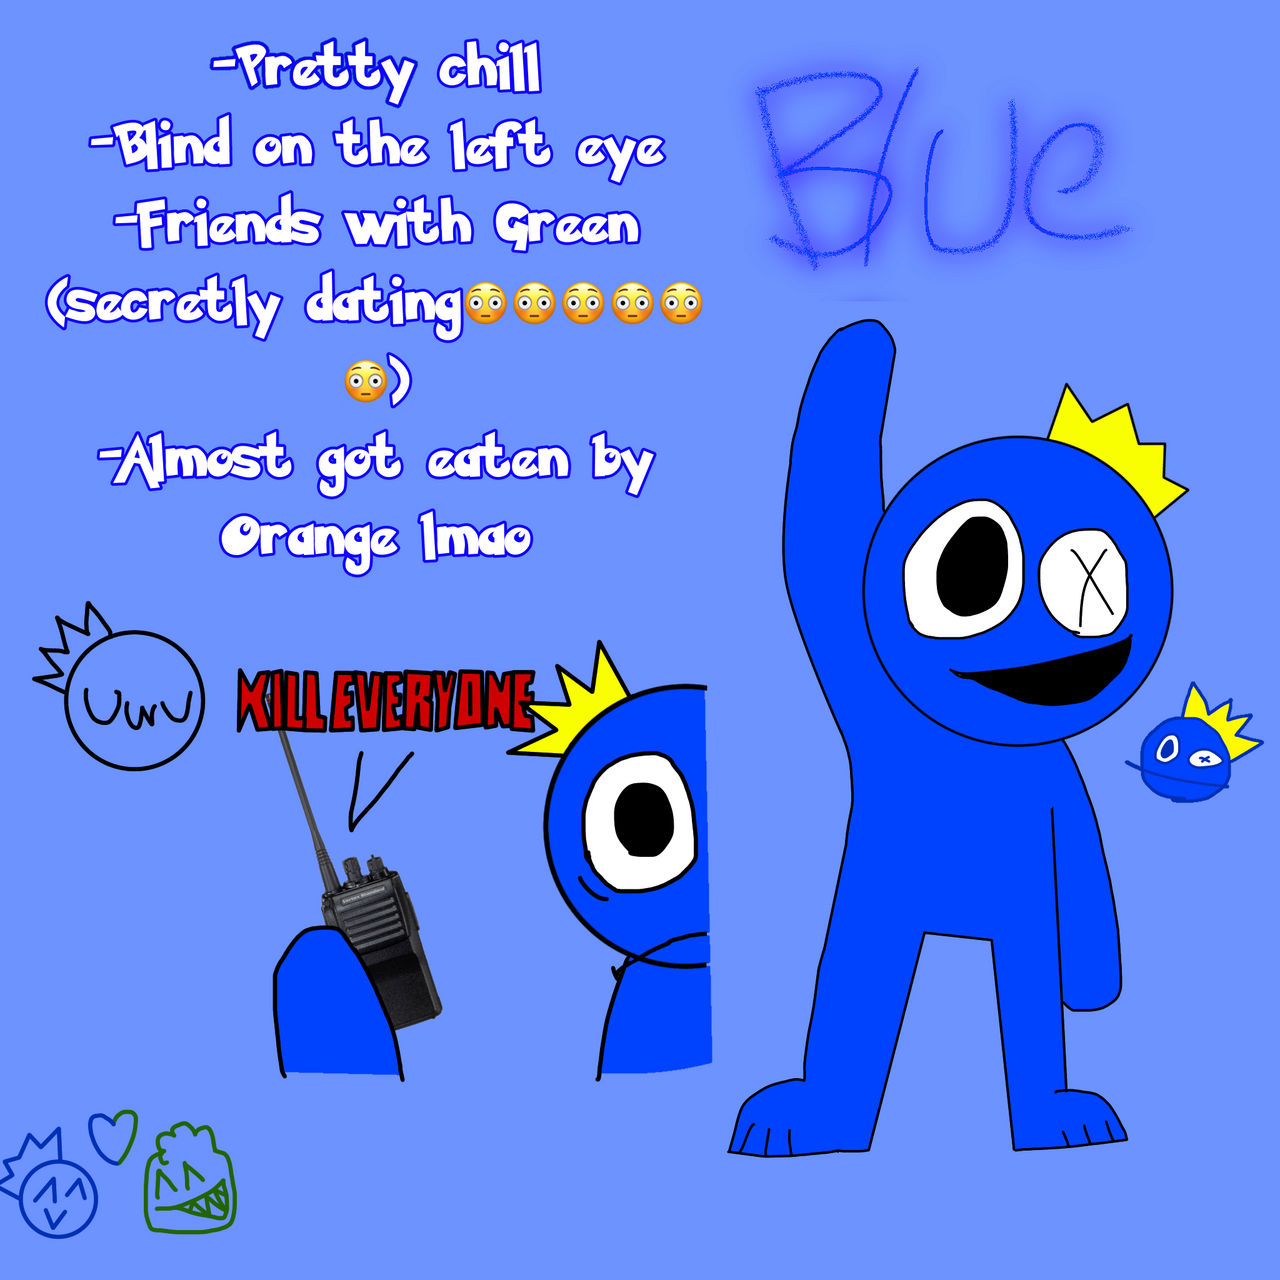 blue from Rainbow friends by lamprini1234 on DeviantArt